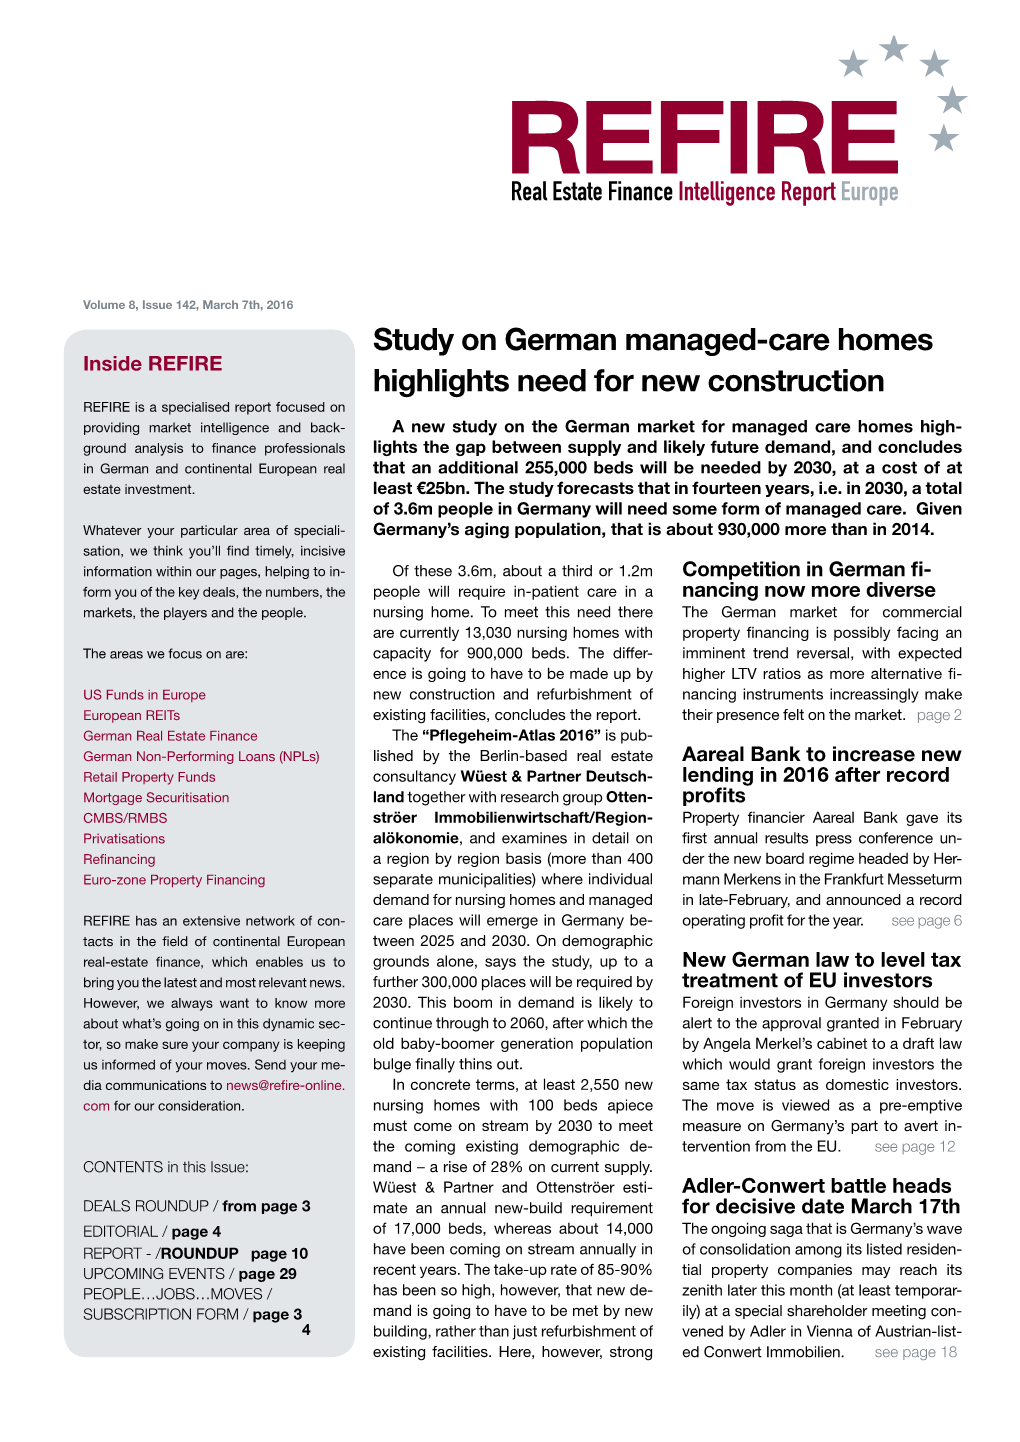 Study on German Managed-Care Homes Highlights Need for New Construction